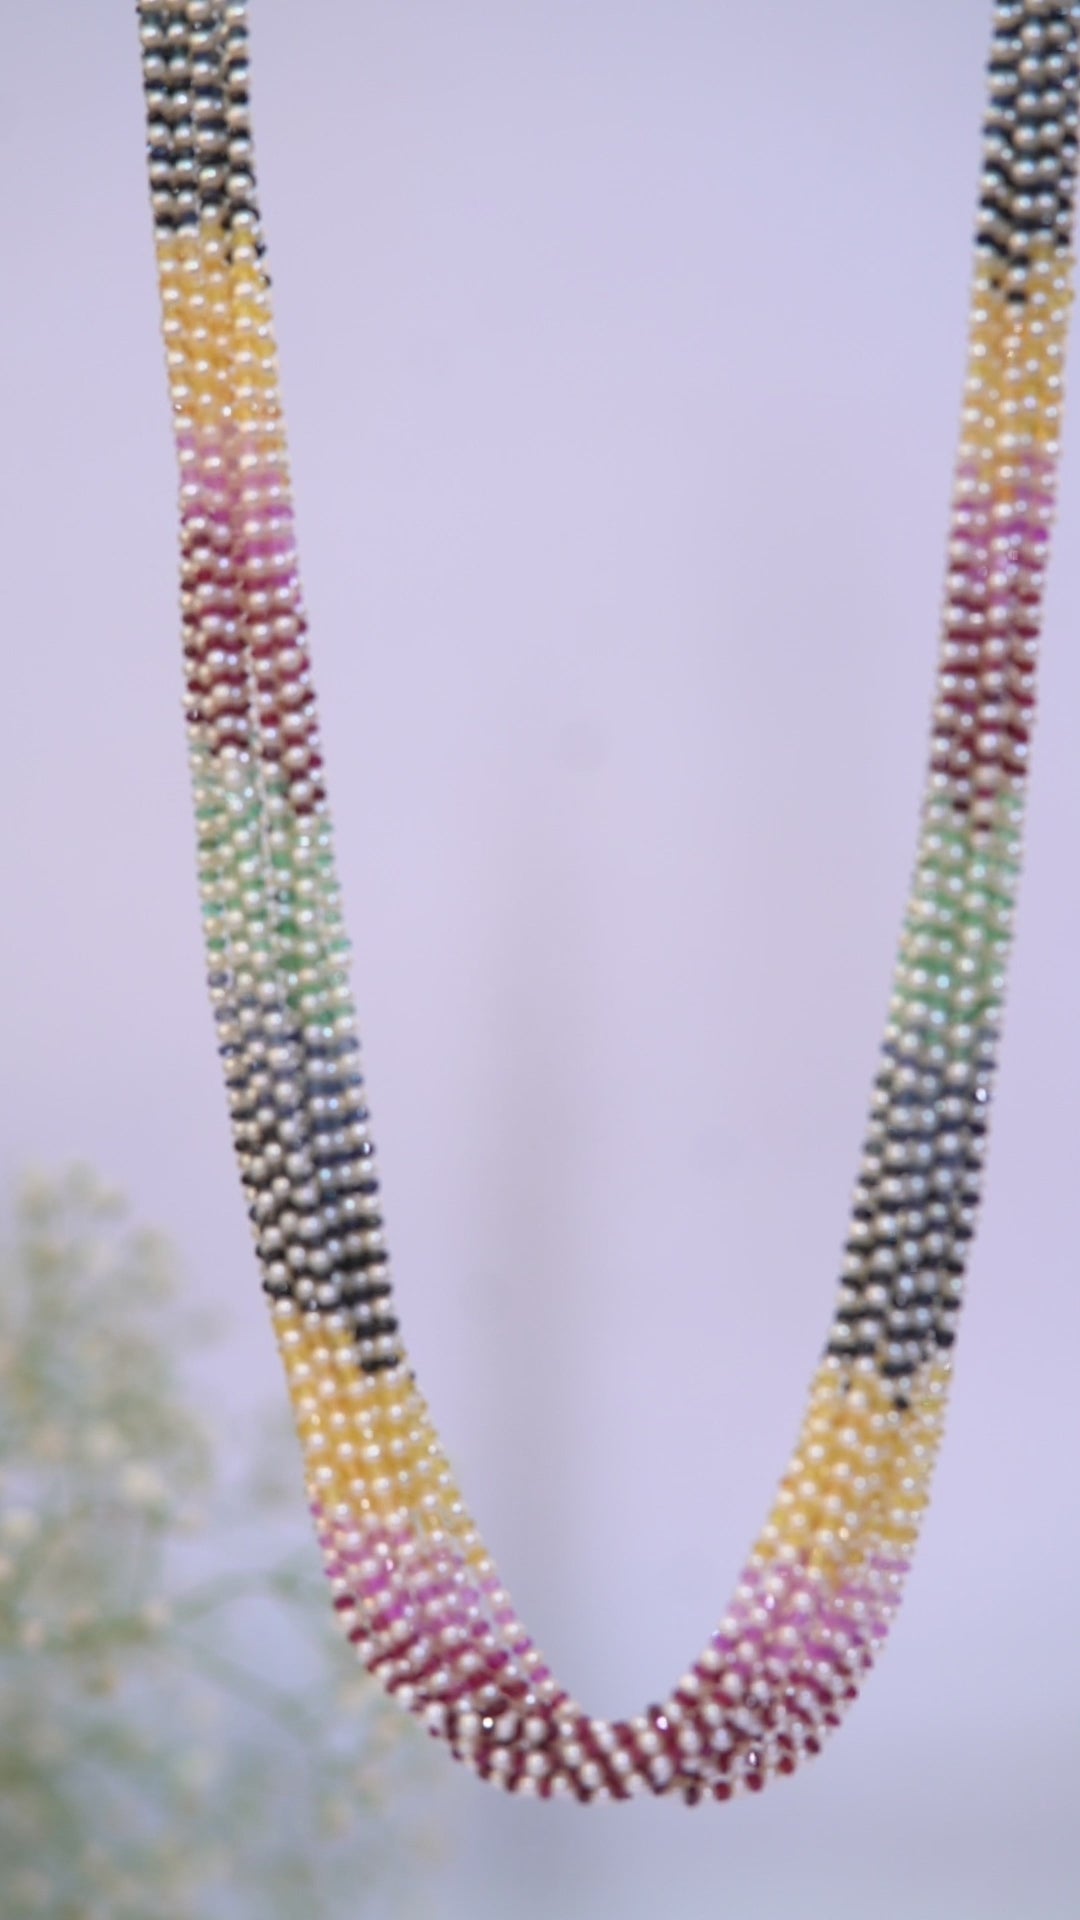 Buy gold plated glass beads necklace Online In India At Discounted Prices